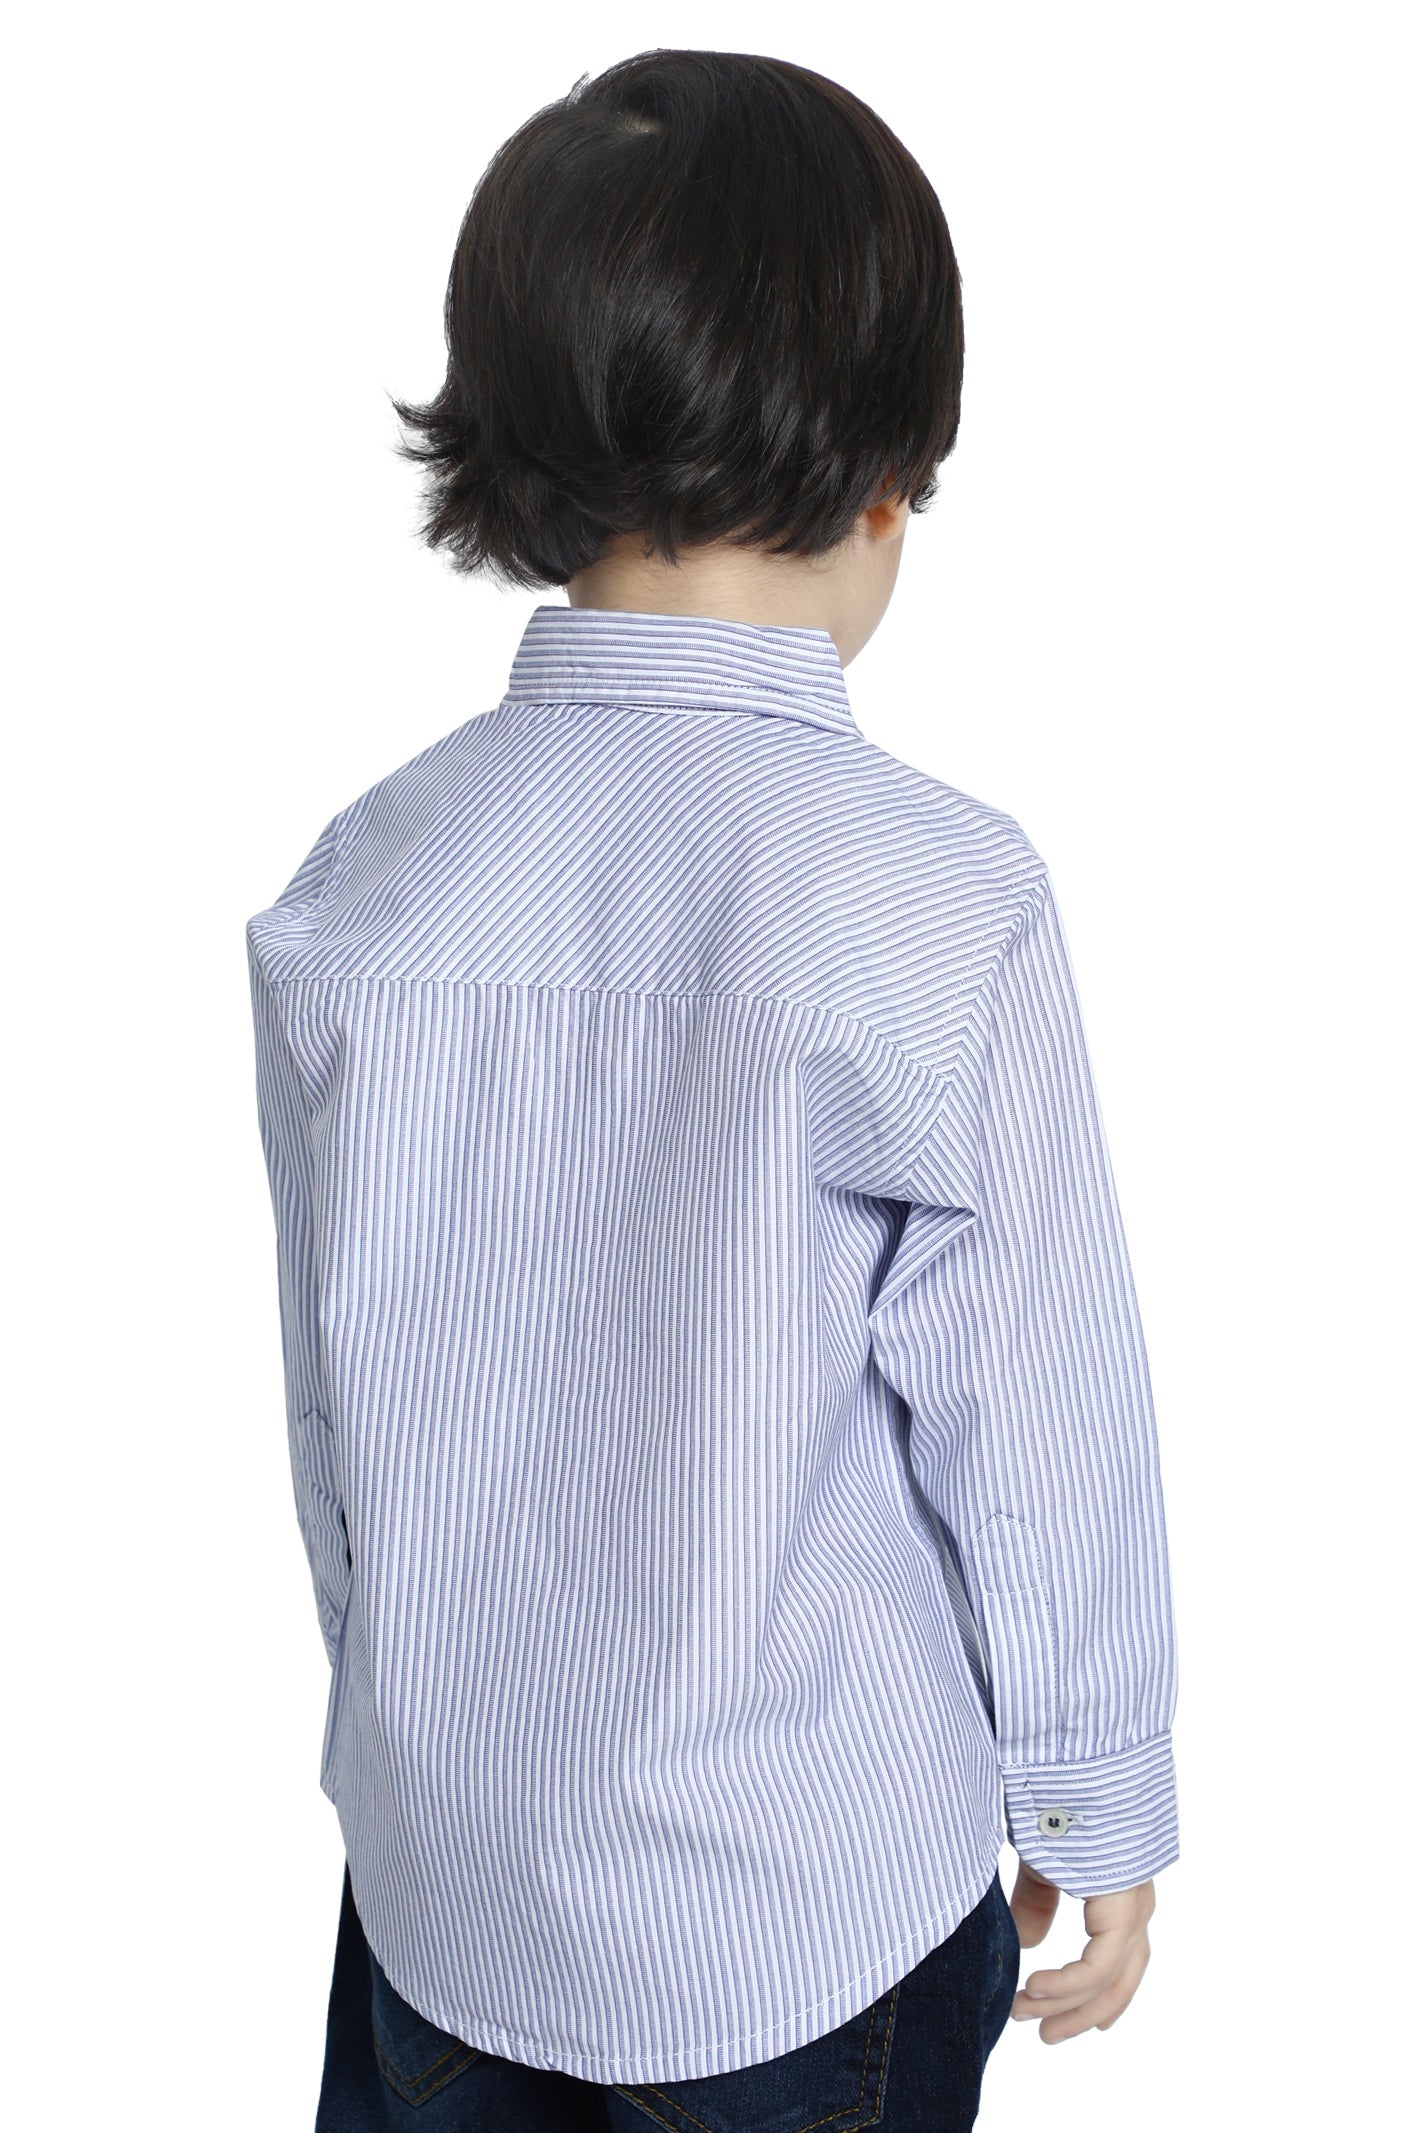 Boys Toddler Casual Shirt In Blue SKU: IBB-0023-BLUE - Diners